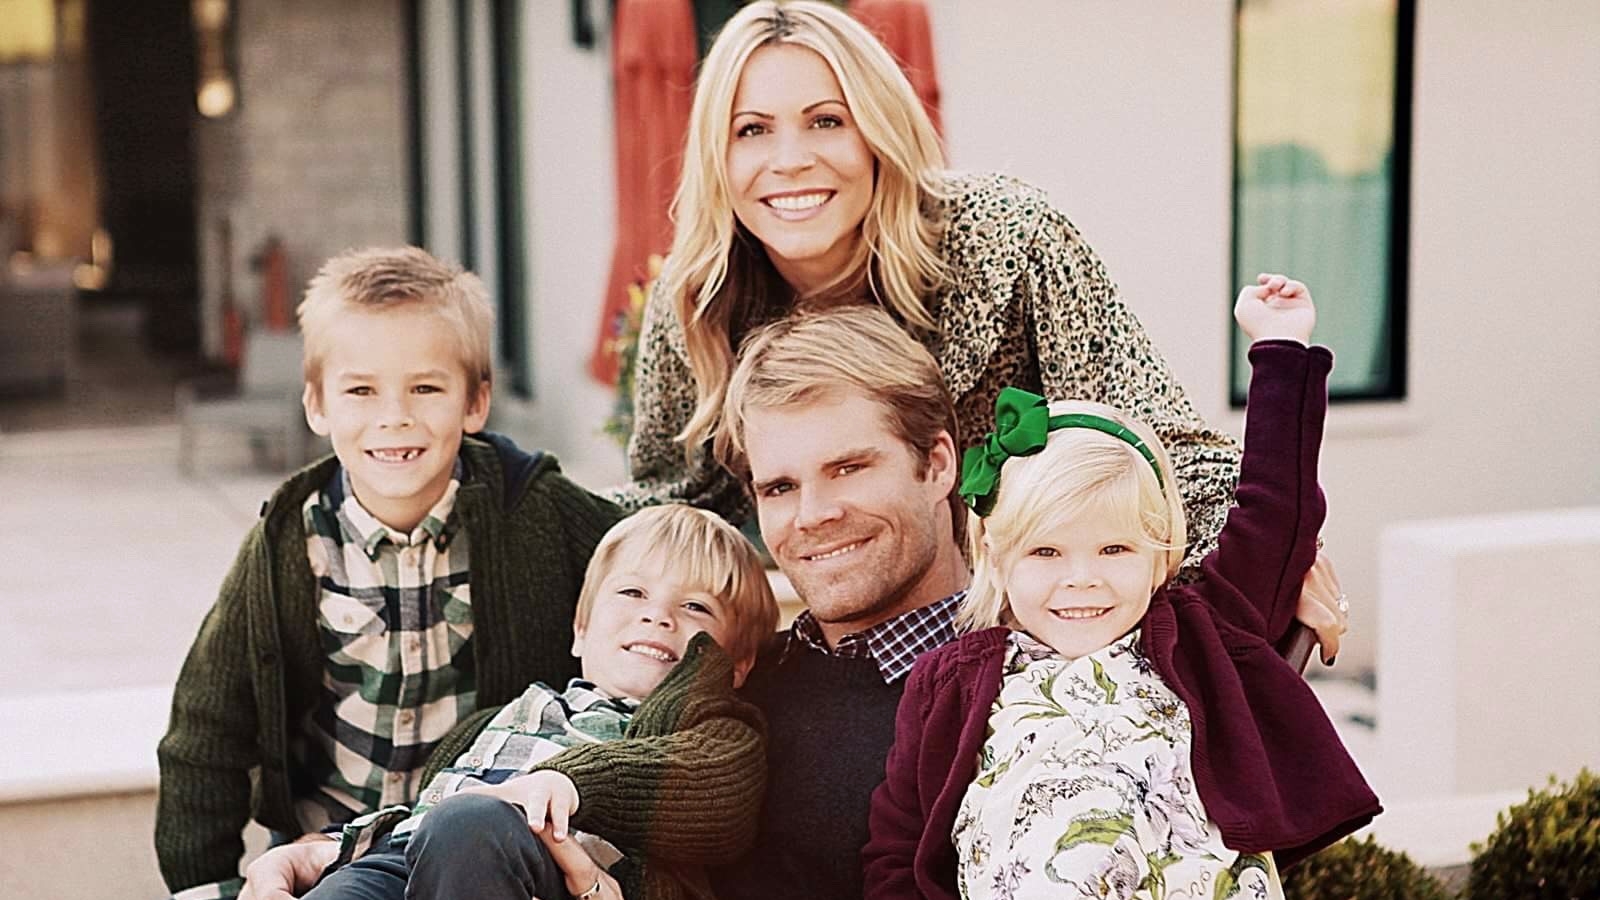 Carolina Panthers' tight end Greg Olsen has accomplished things on the football field no other tight end in NFL history has done. But even after leading his team to Super Bowl 50, the three-time Pro Bowler lends his support and time to a cause close to his heart and the hearts of many others. 